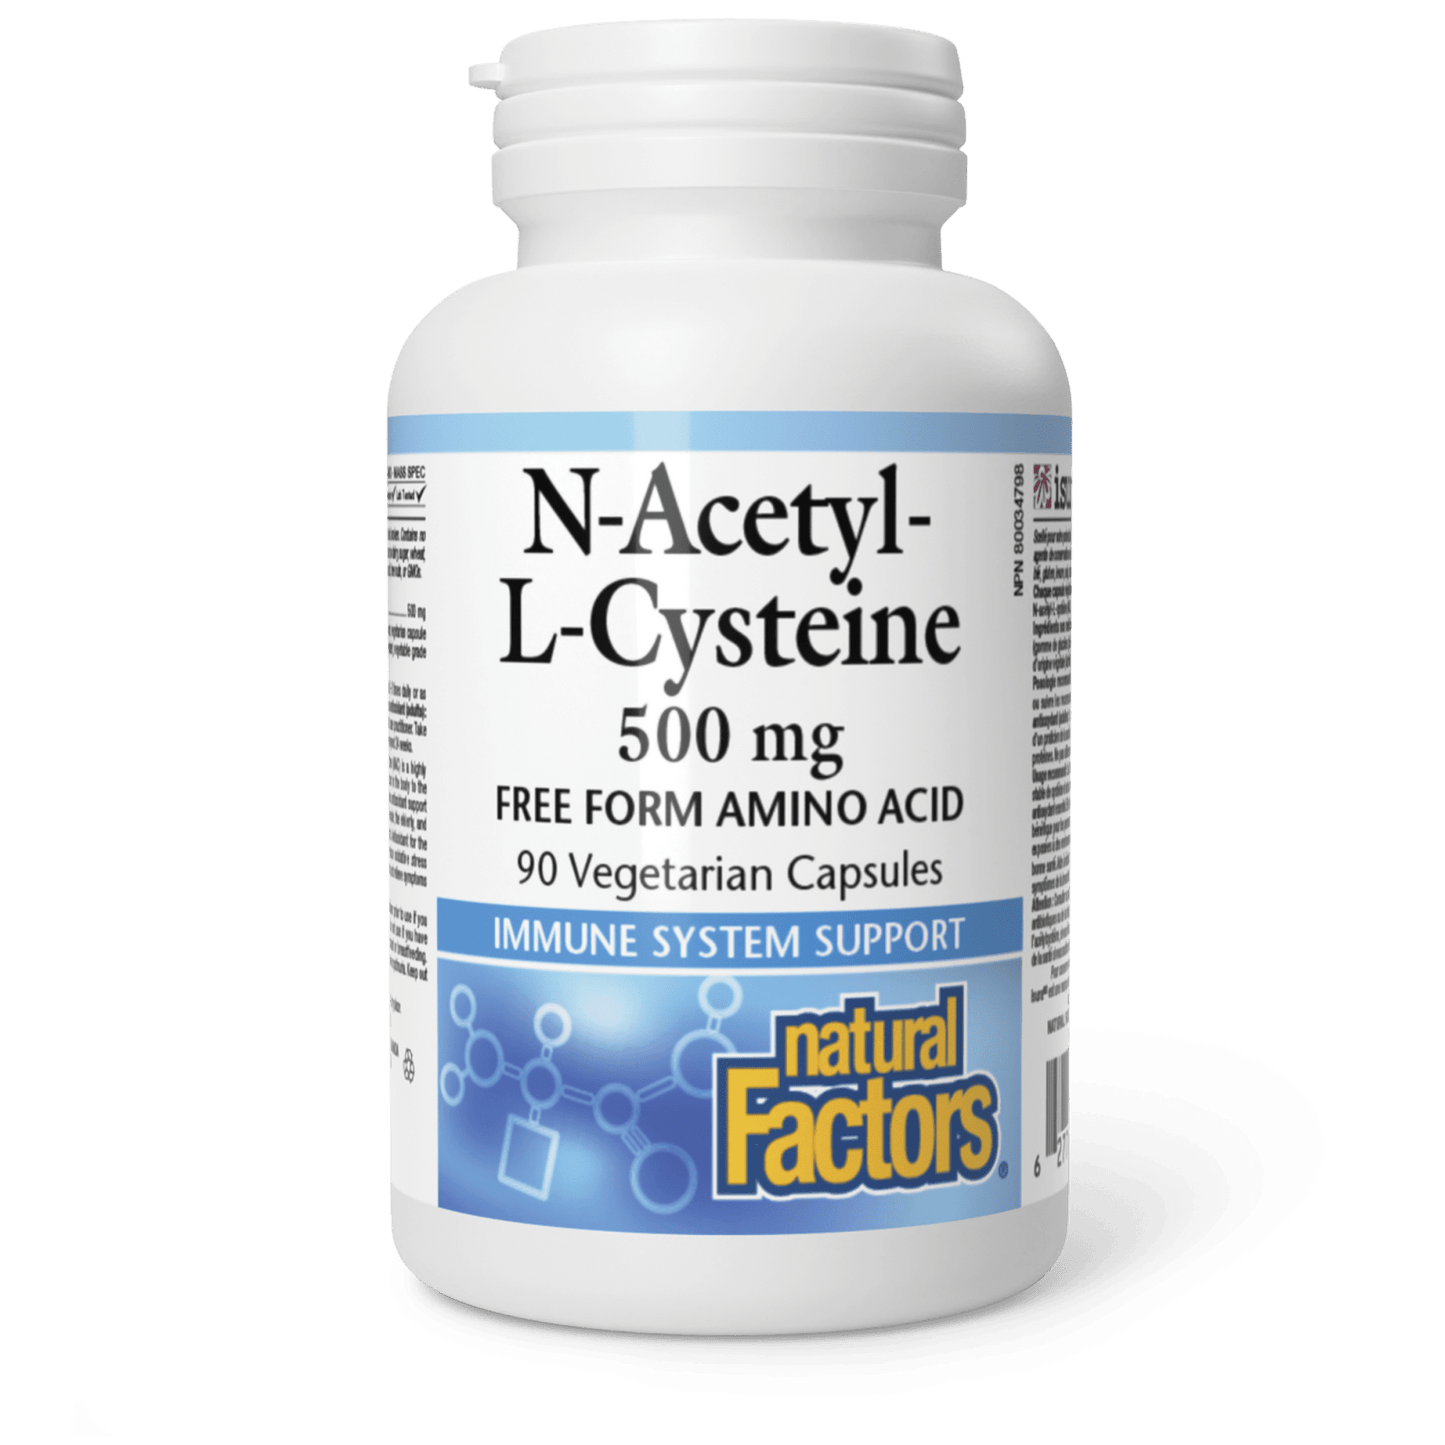 N-Acetyl-L-Cysteine 500 mg, Natural Factors|v|image|2815